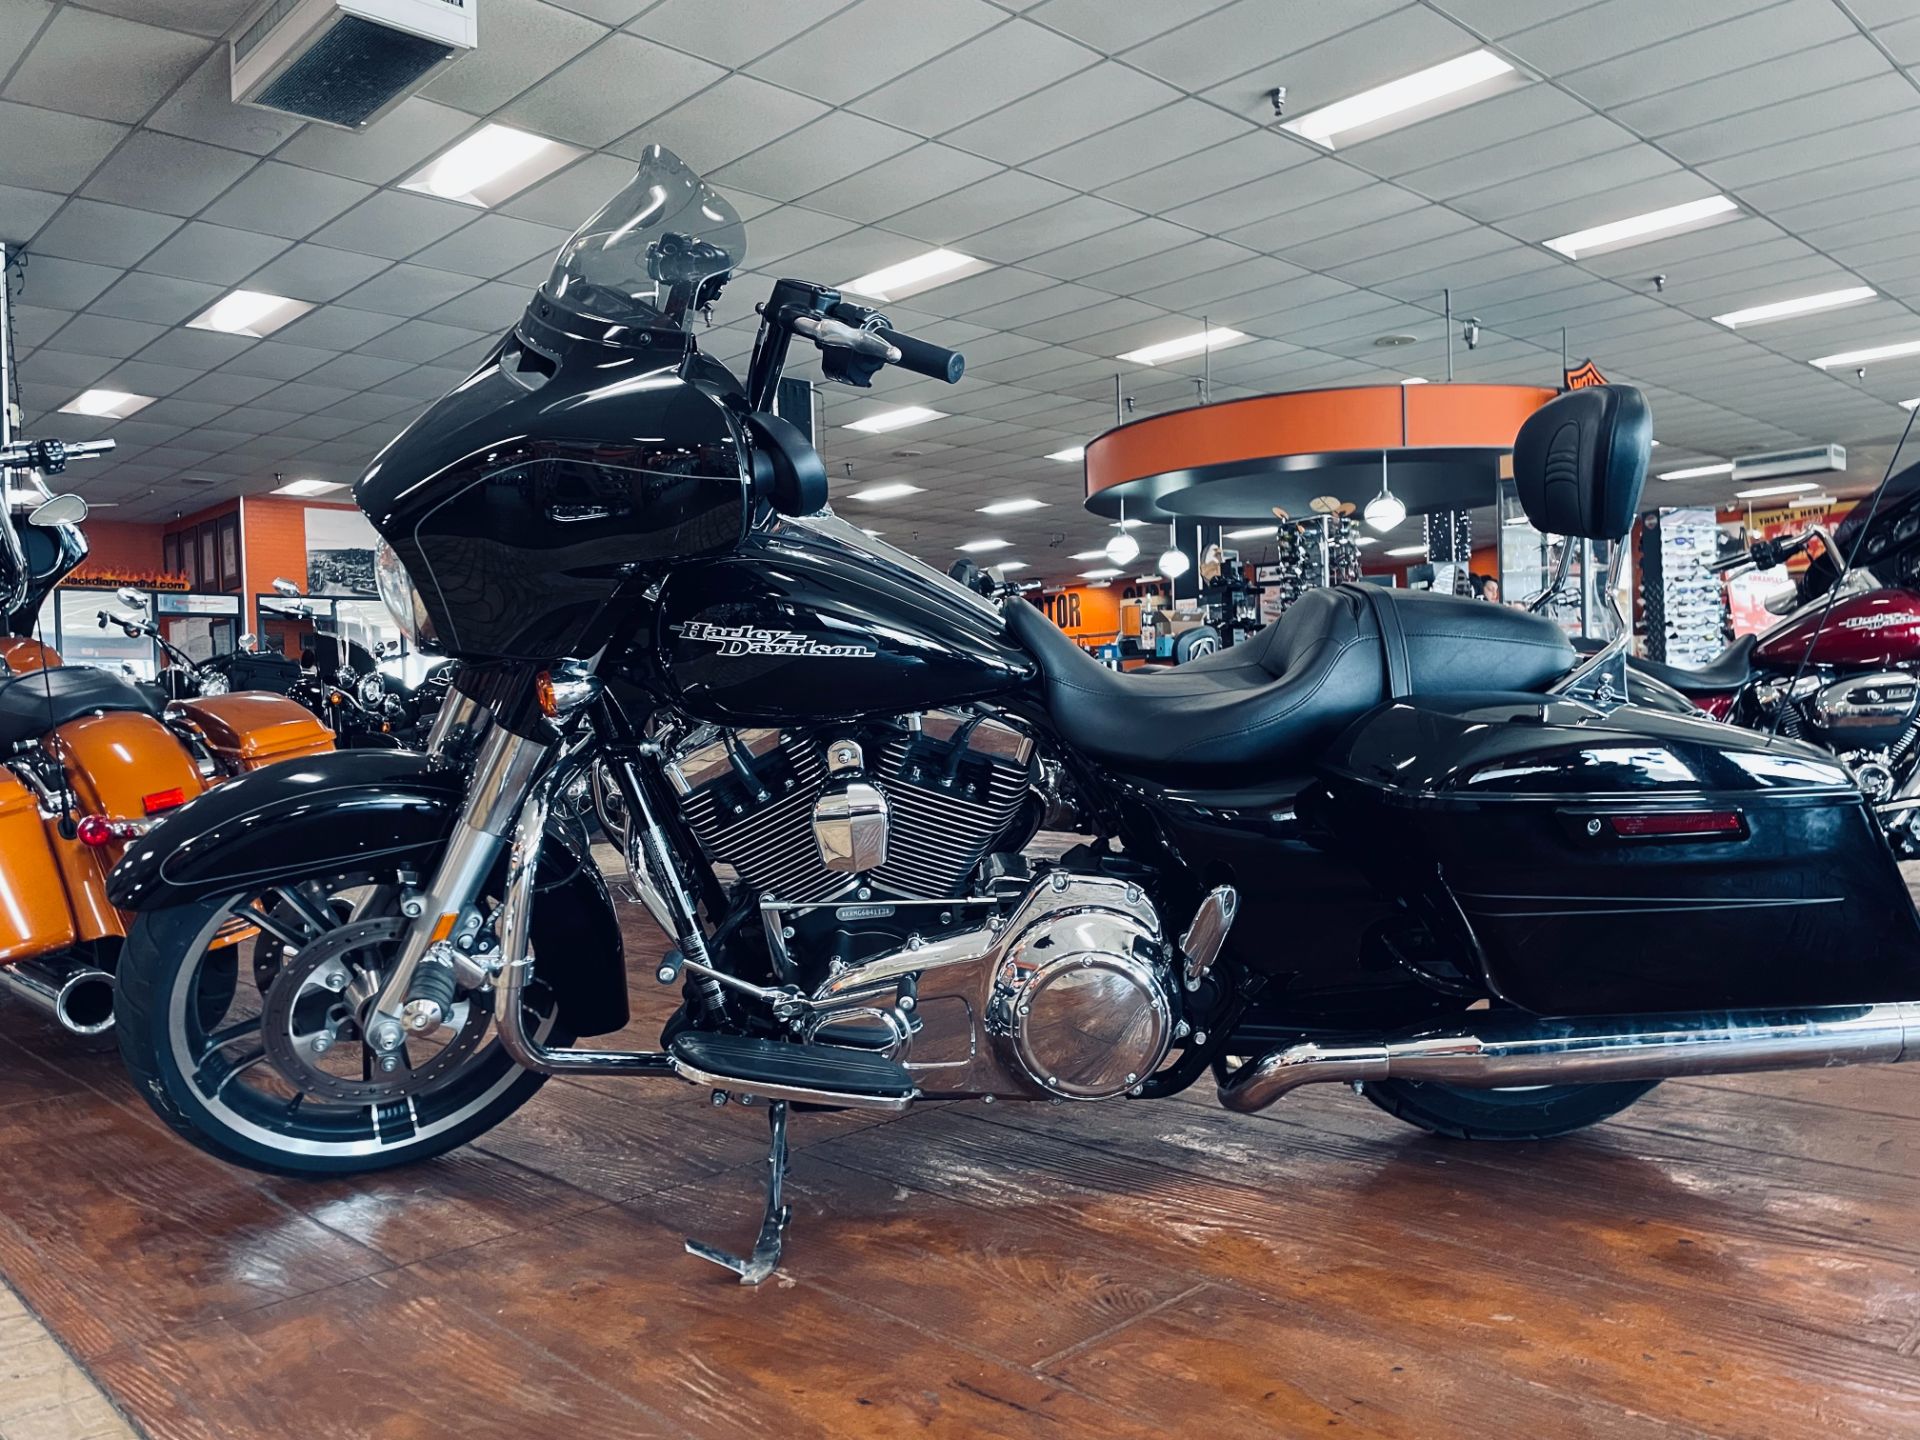 2016 Harley-Davidson Street Glide Special in Marion, Illinois - Photo 3